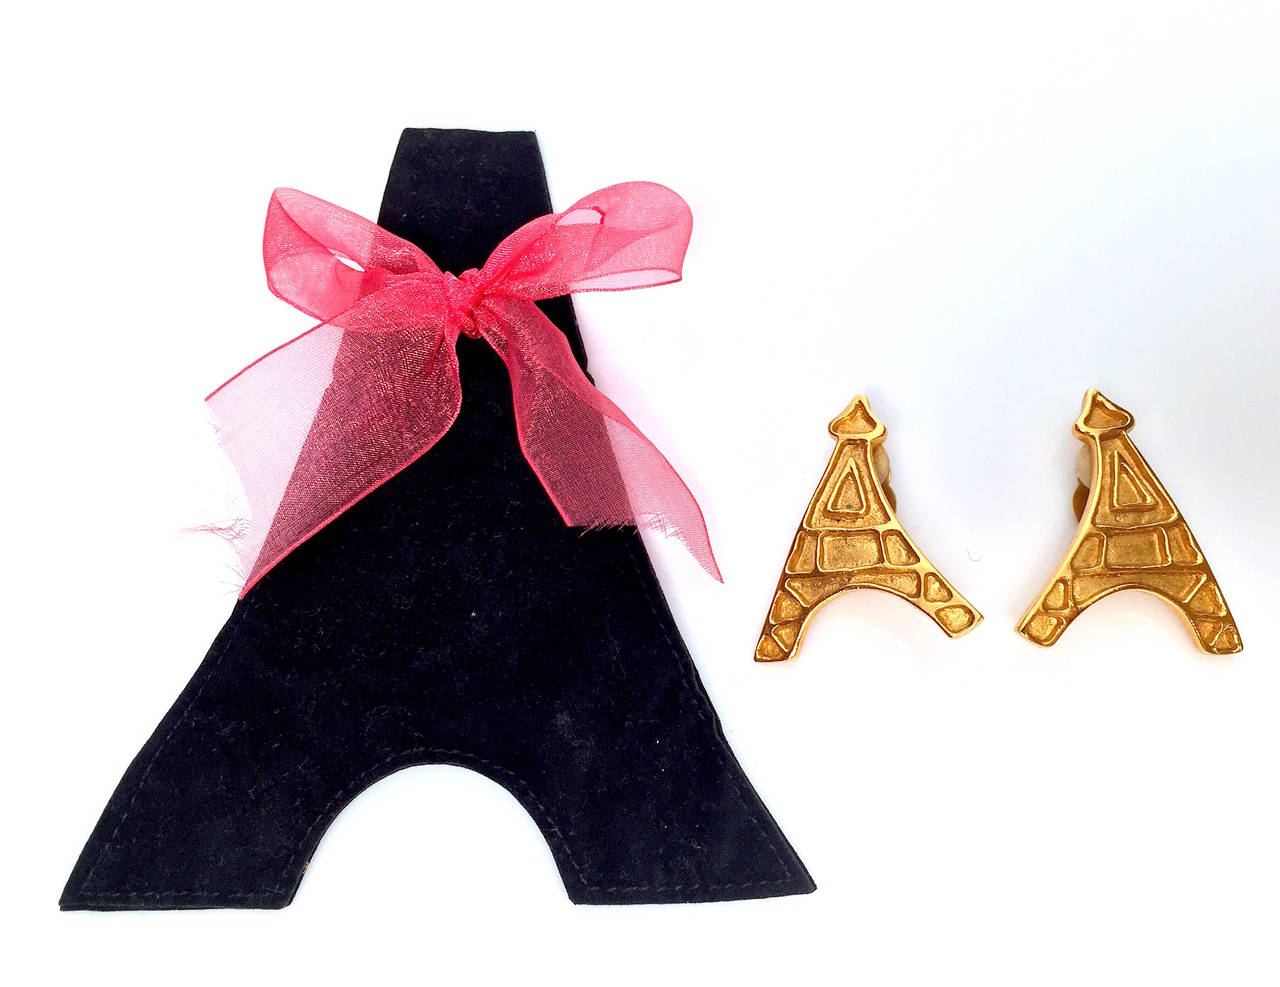 Yves Saint Laurent YSL Gold-Tone Eiffel Tower Earrings, 1980s In Excellent Condition For Sale In Bethesda, MD